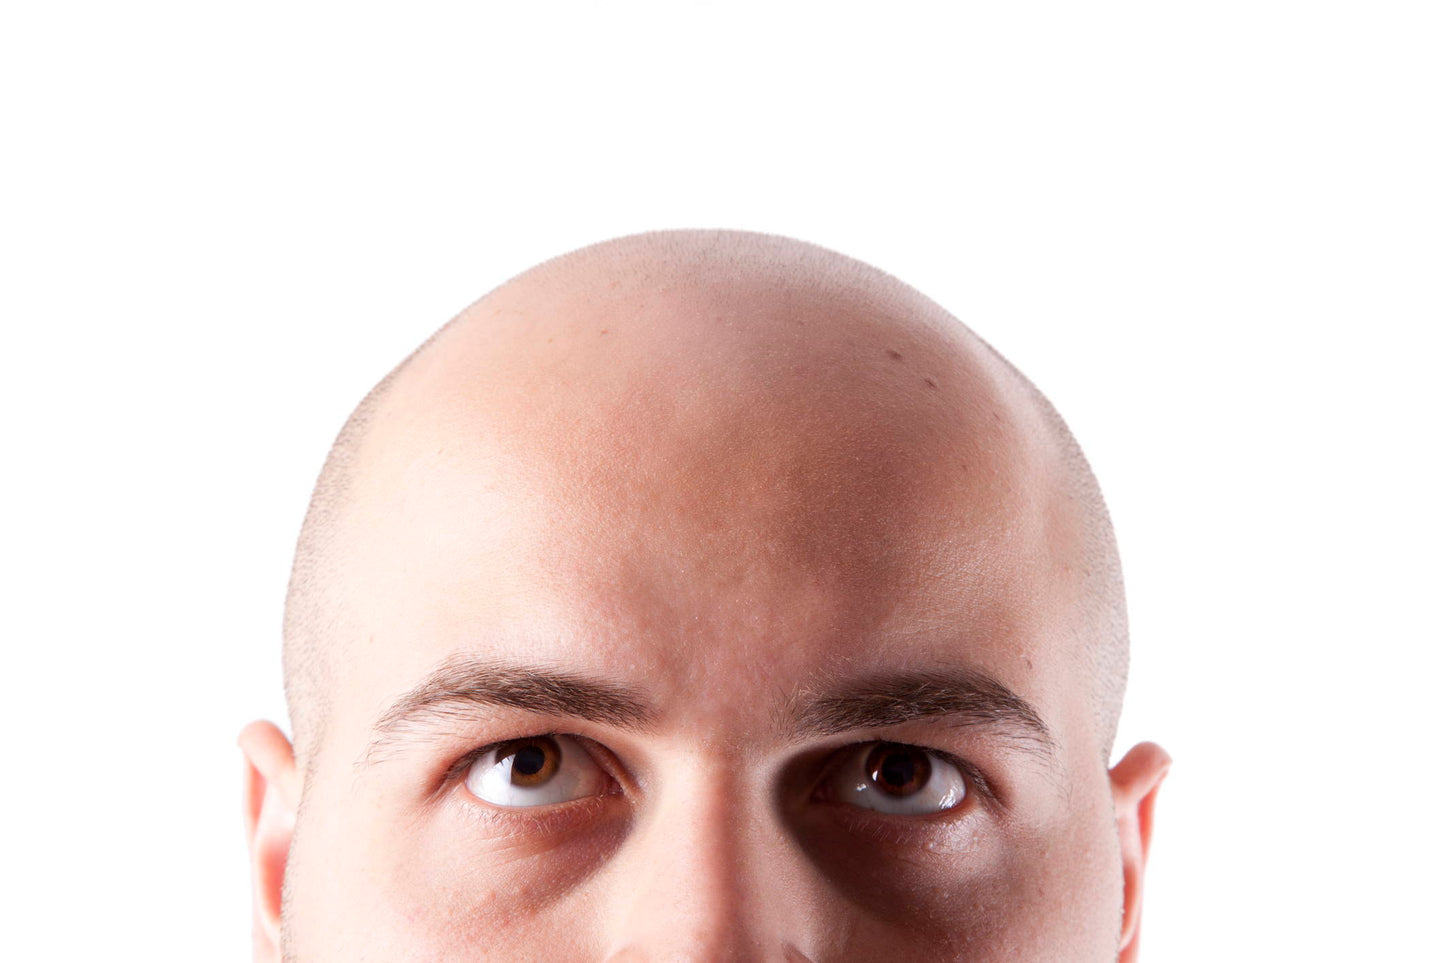 The Anatomy Of The Scalp (For Hair Loss Purposes)